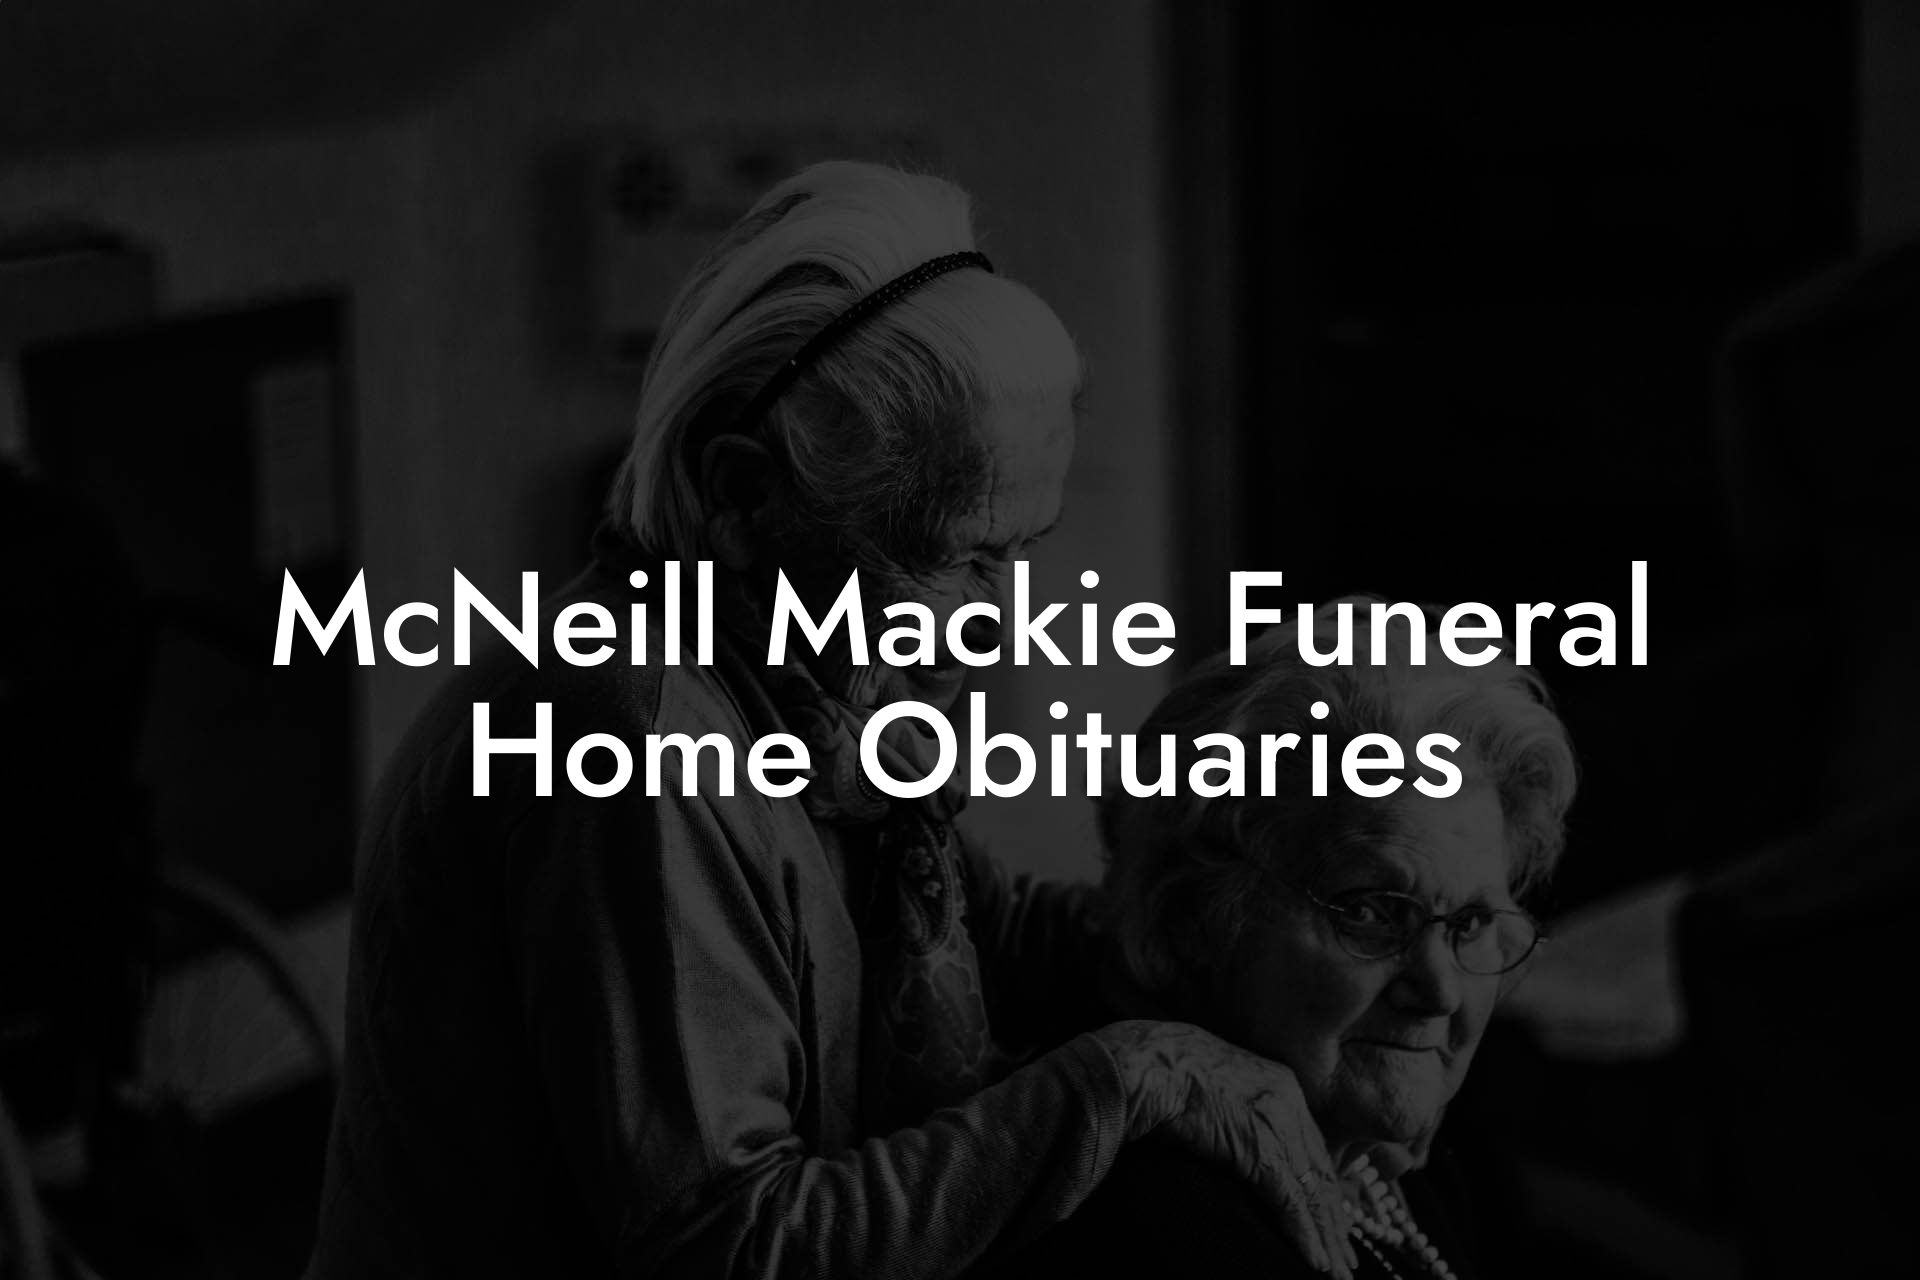 McNeill Mackie Funeral Home Obituaries